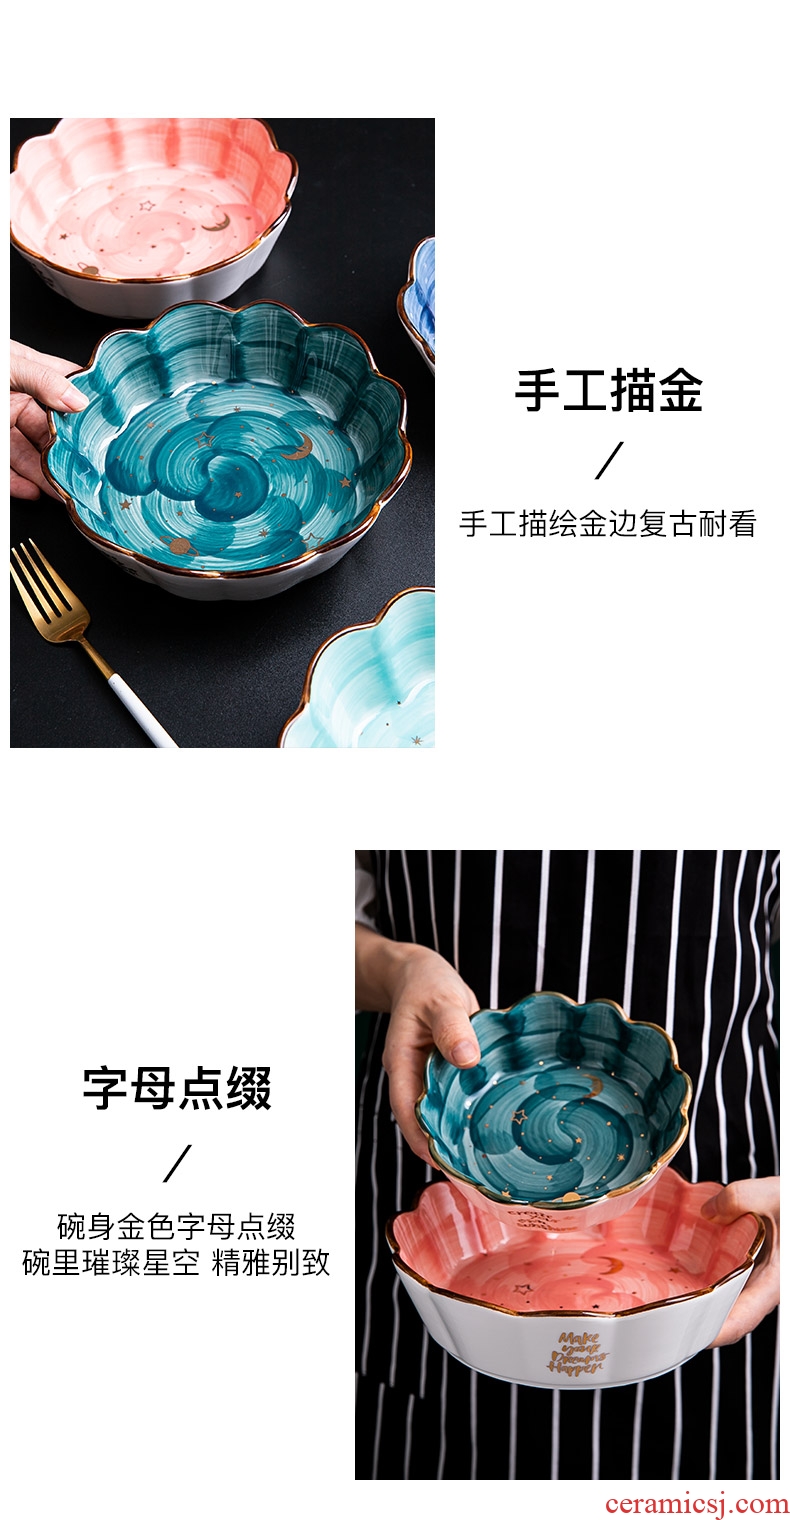 Star bowl of individual student home lovely ins salad bowl creative personality ceramic bowl dessert rainbow noodle bowl for breakfast